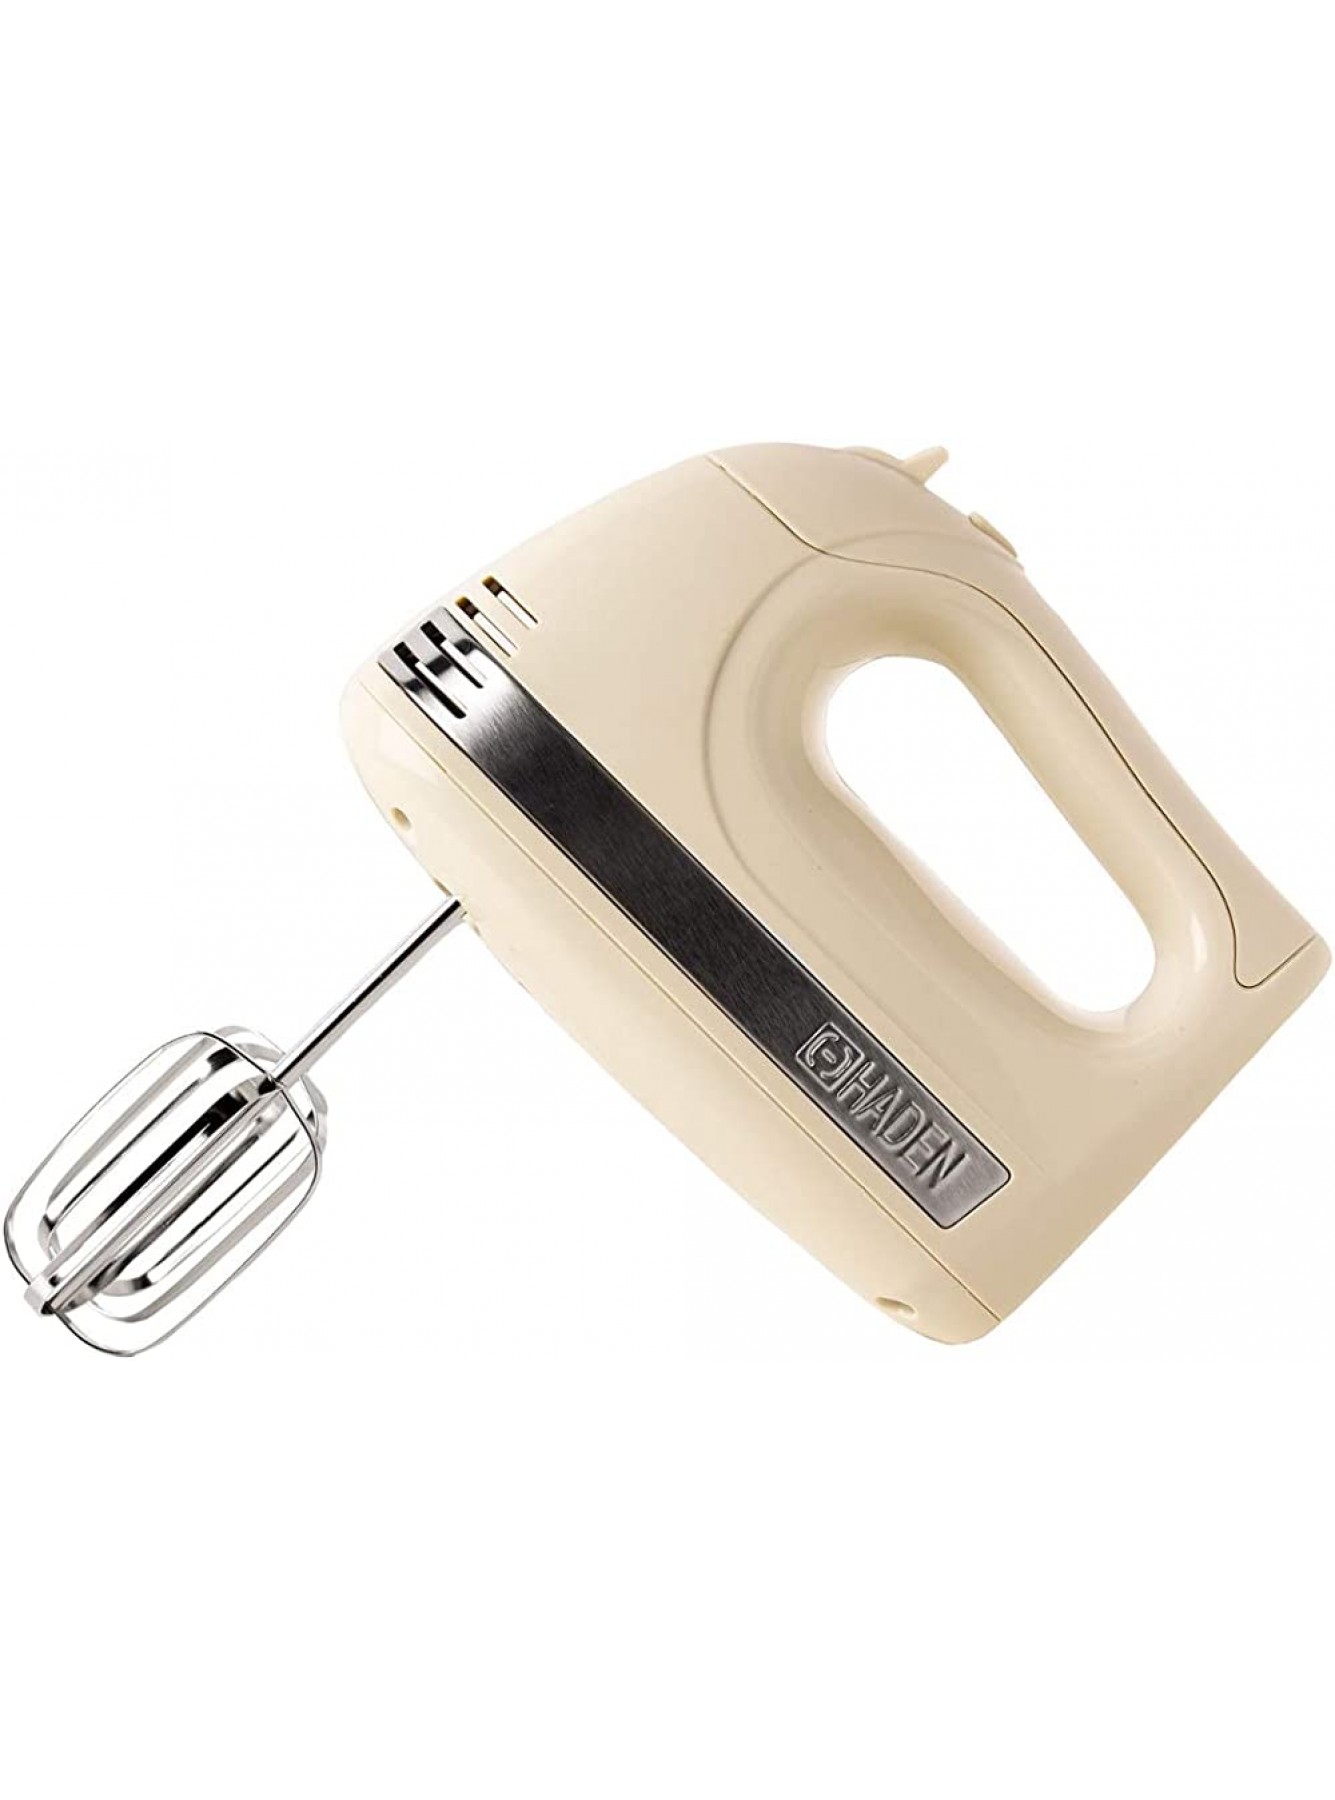 Haden Cream Electric Hand Mixer 5 Speeds 2 Beaters and Storage Box CF25 - FUOW6SH1